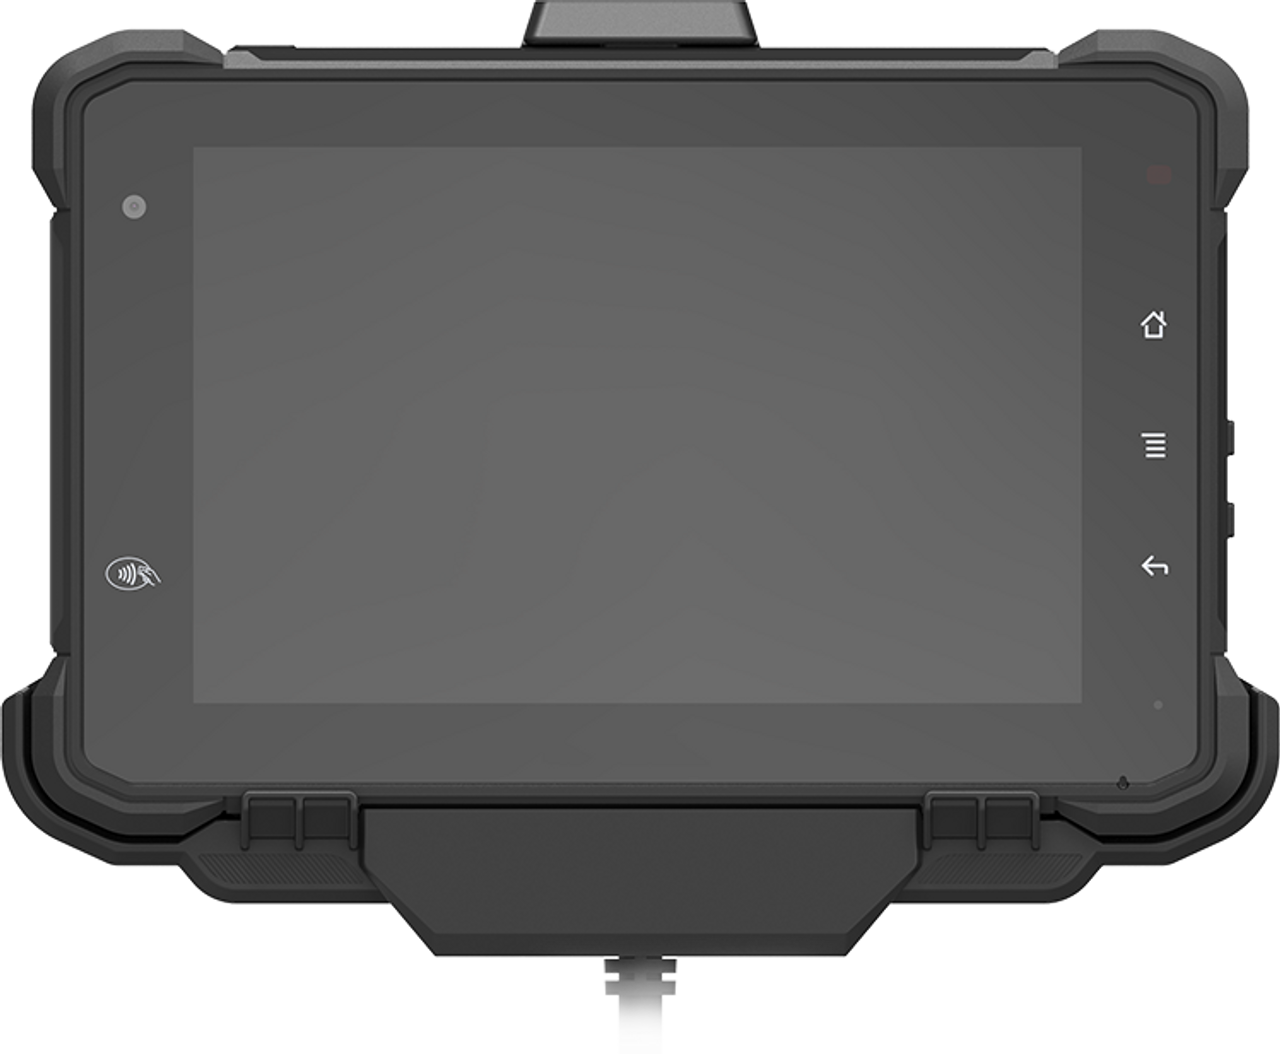 RT-V7000 Pro In-Vehicle Tablet